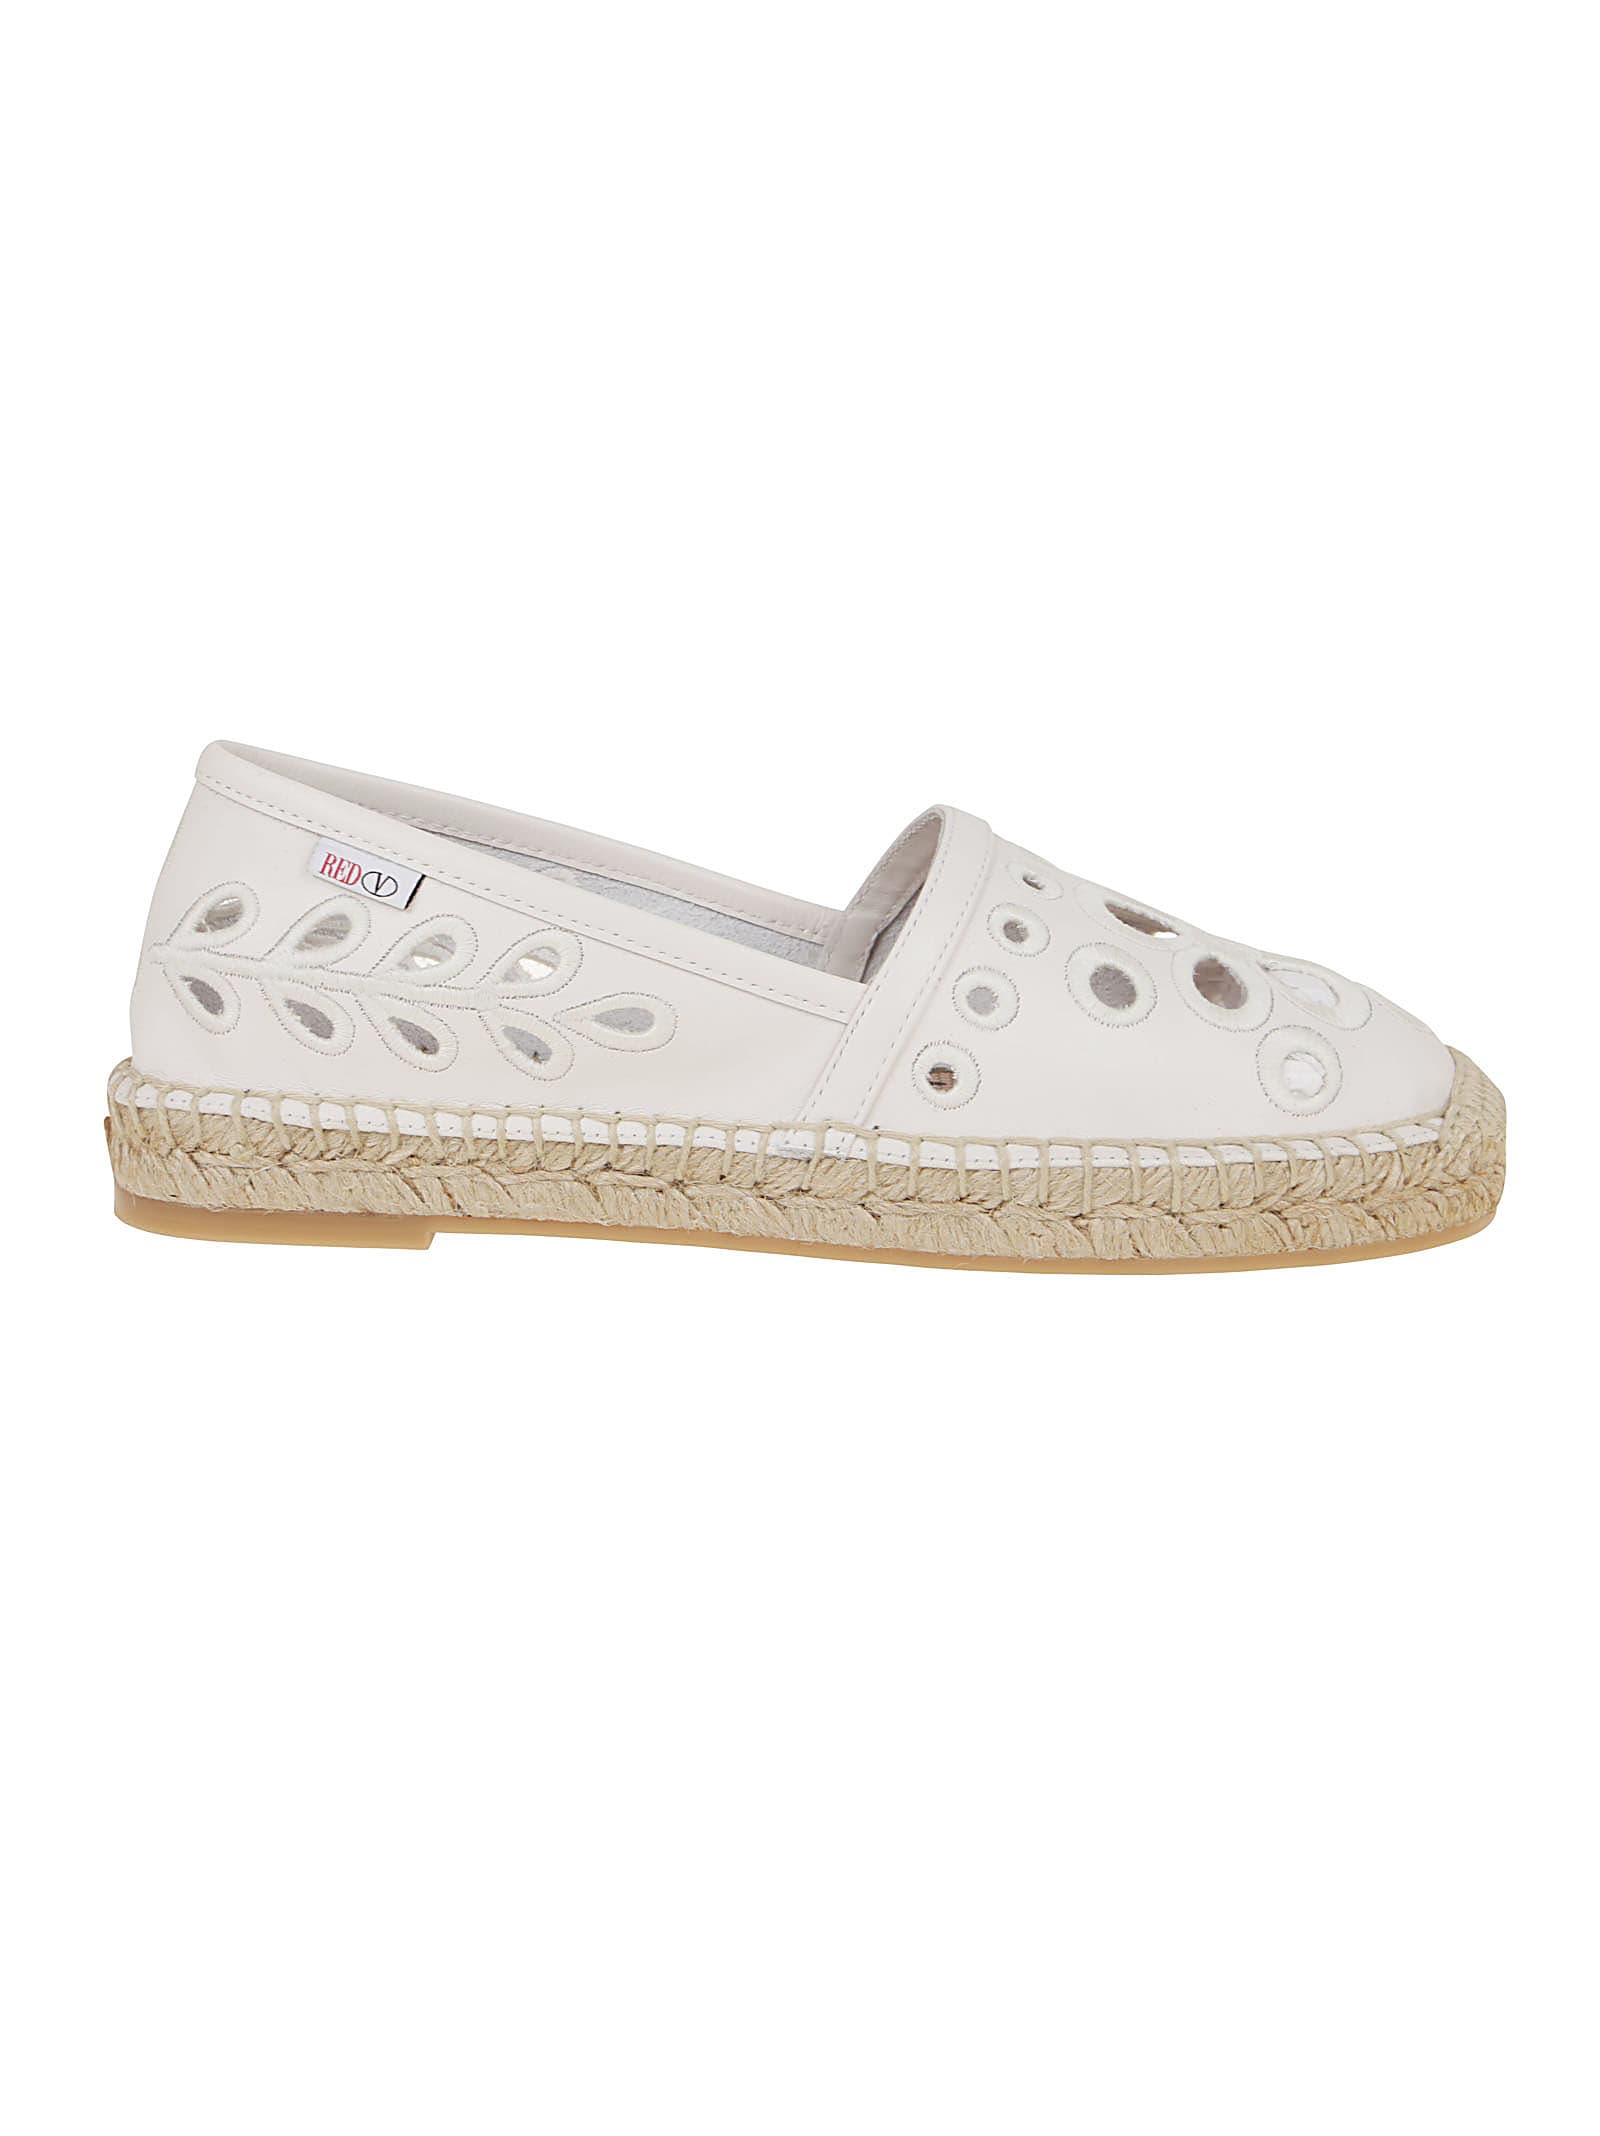 Buy RED Valentino Espadrillas H 05 online, shop RED Valentino shoes with free shipping